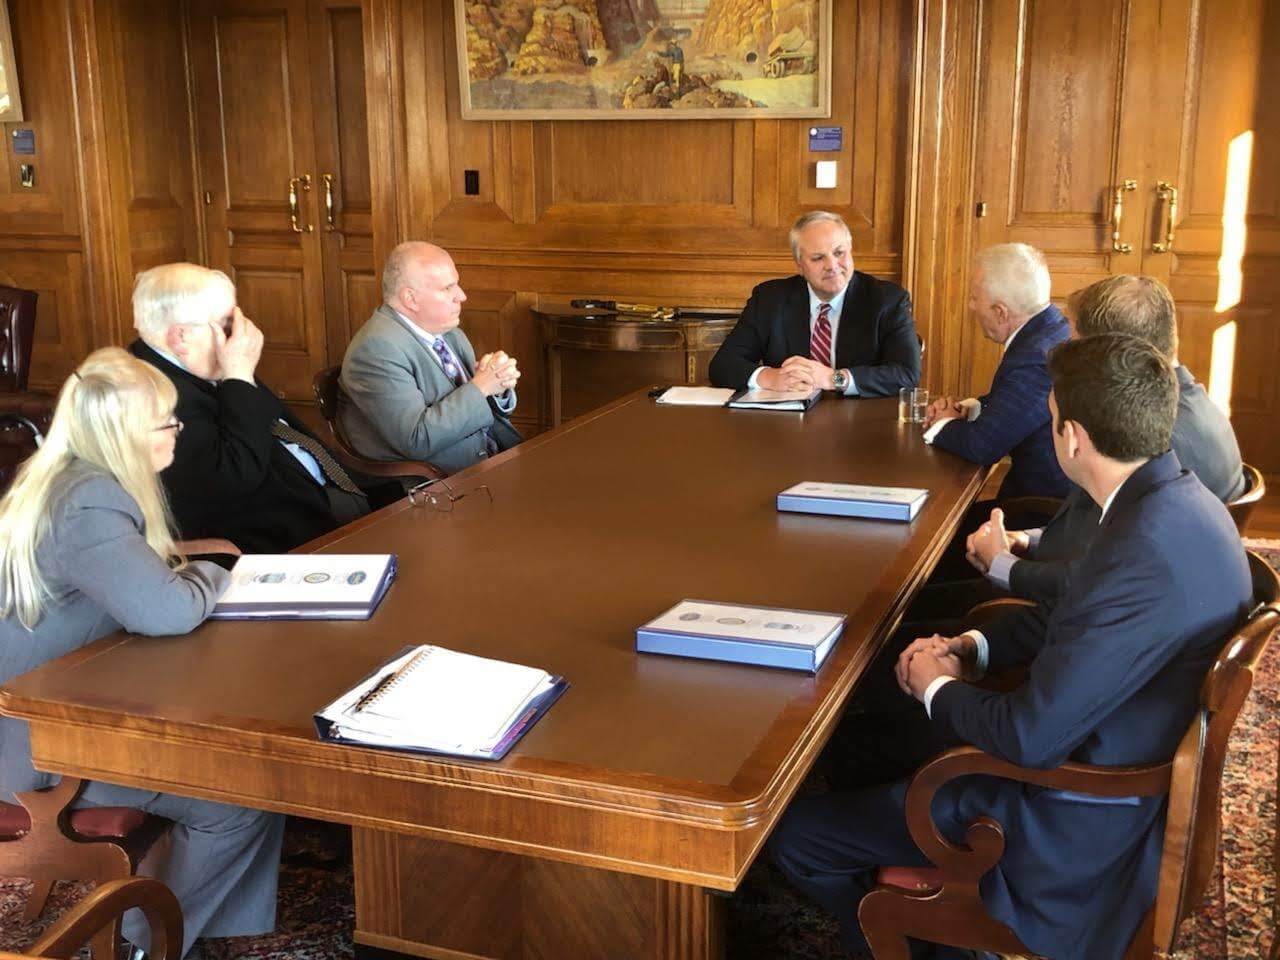 U.S. Department of Interior Secretary David Bernhardt hosts a meeting in his office to discuss the CBRA issue.  From left